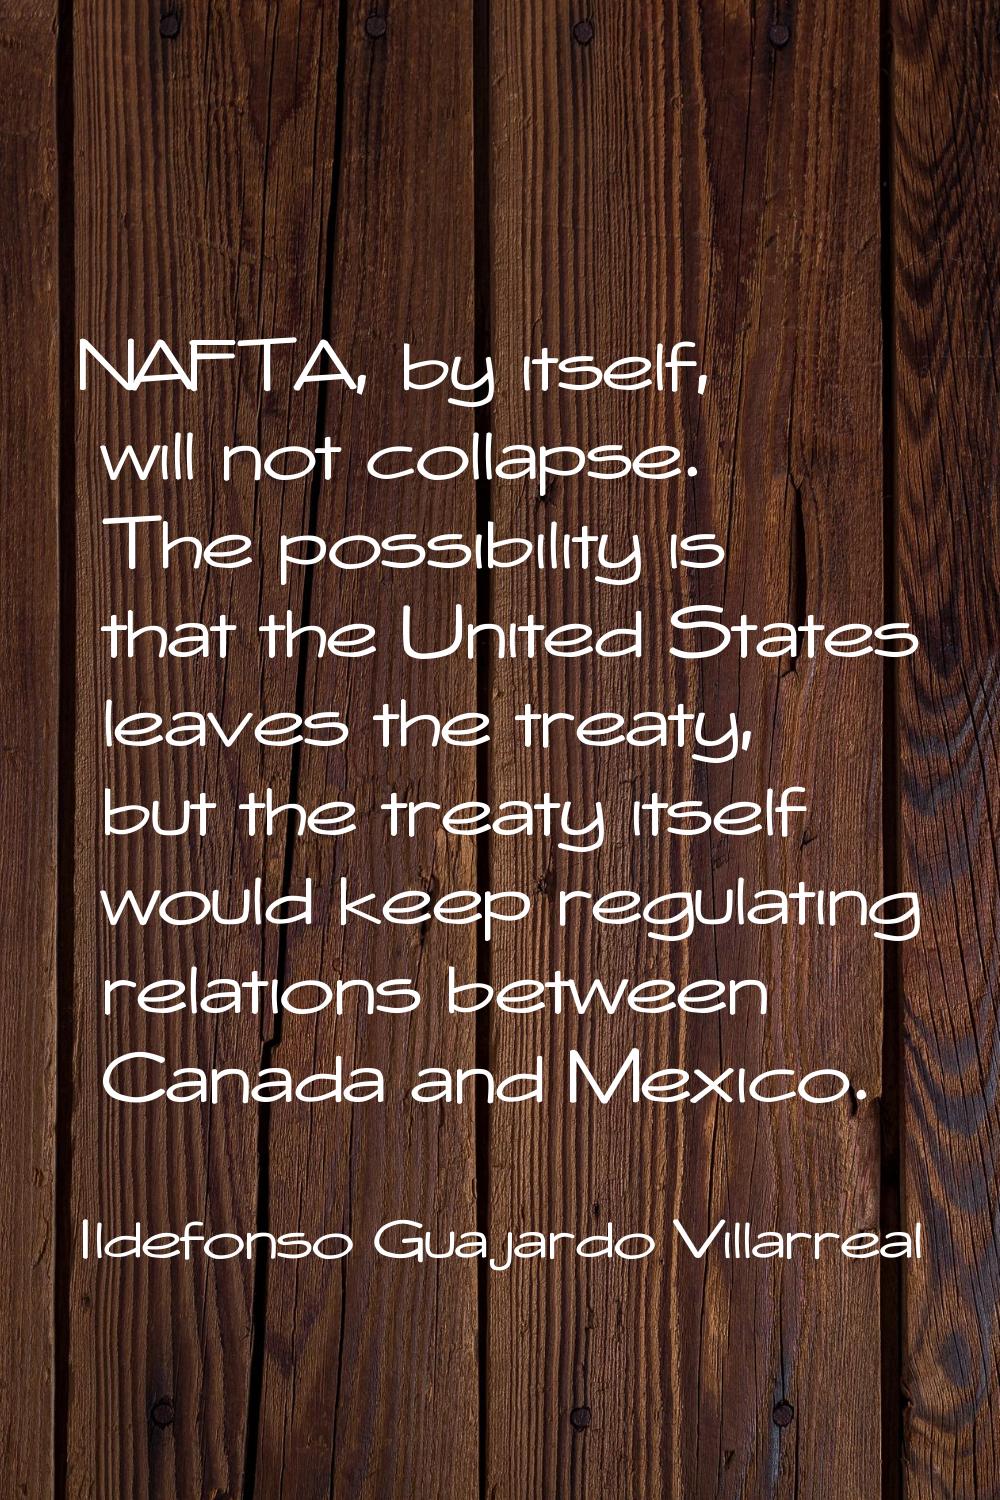 NAFTA, by itself, will not collapse. The possibility is that the United States leaves the treaty, b